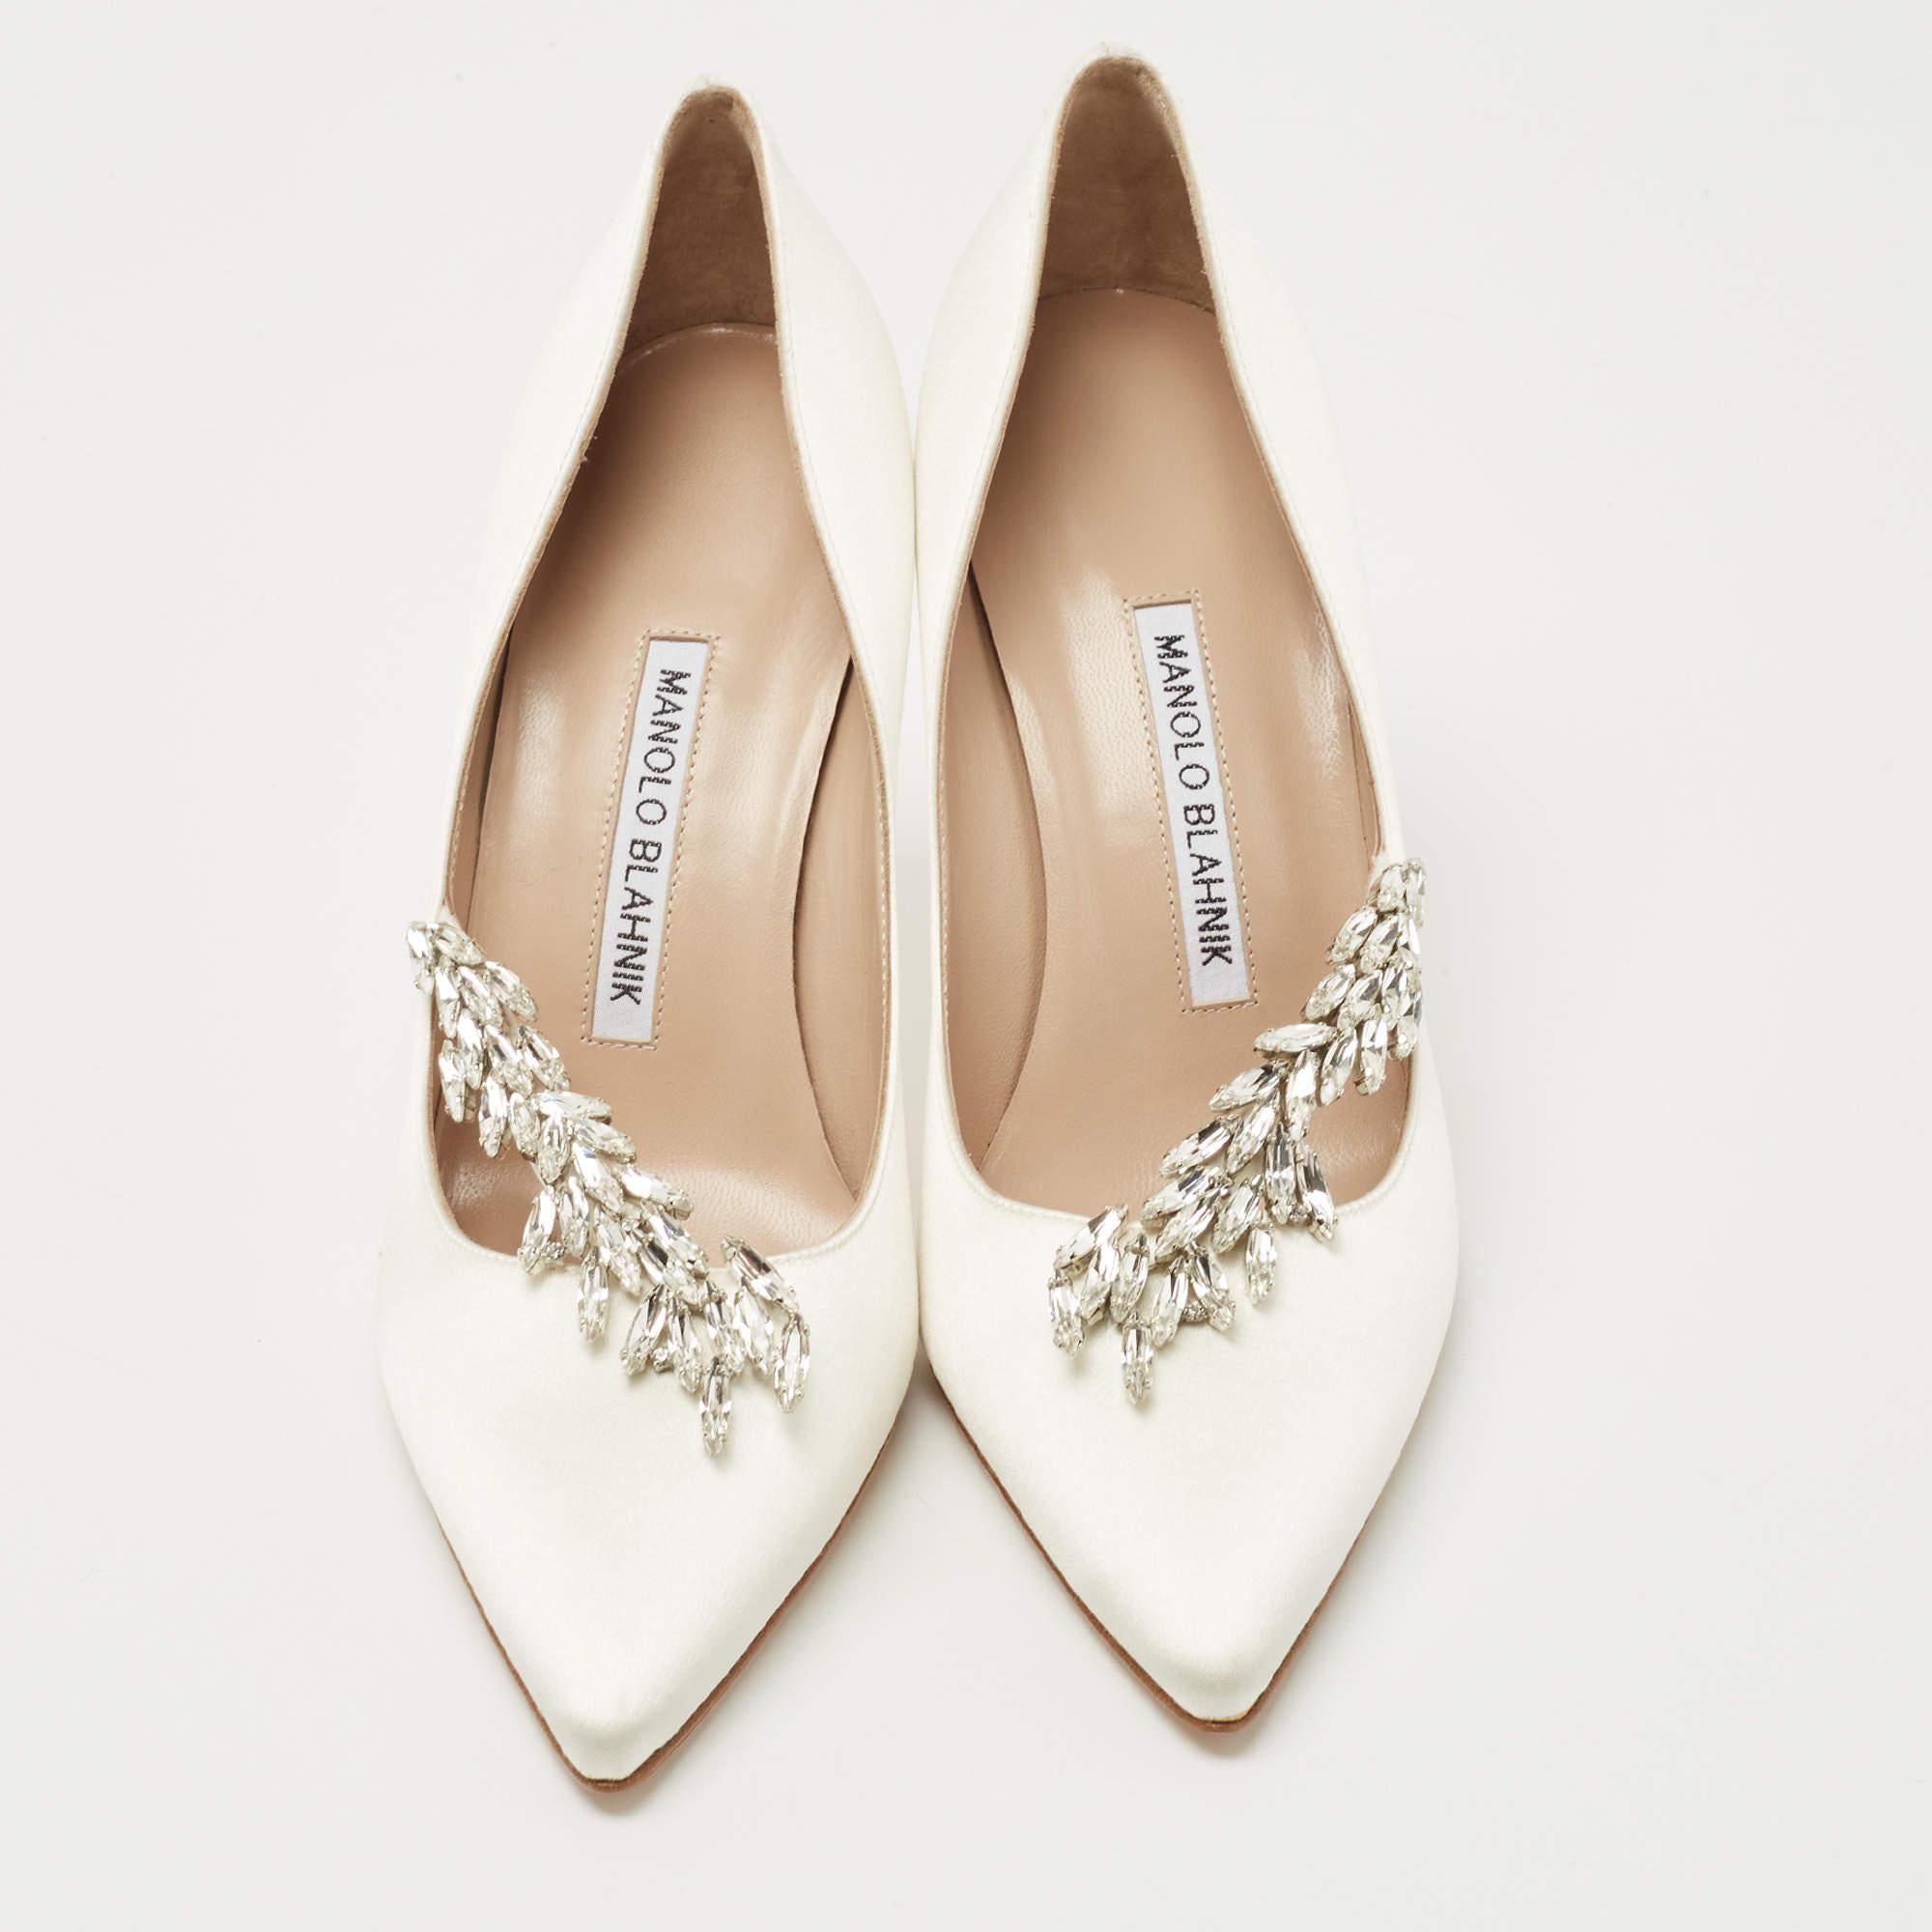 Manolo Blahnik is well-known for his graceful designs, and his label is synonymous with opulence, femininity, and elegance. These Nadira pumps are crafted from satin in a white hue into a pointed toe silhouette augmented by dazzling crystal